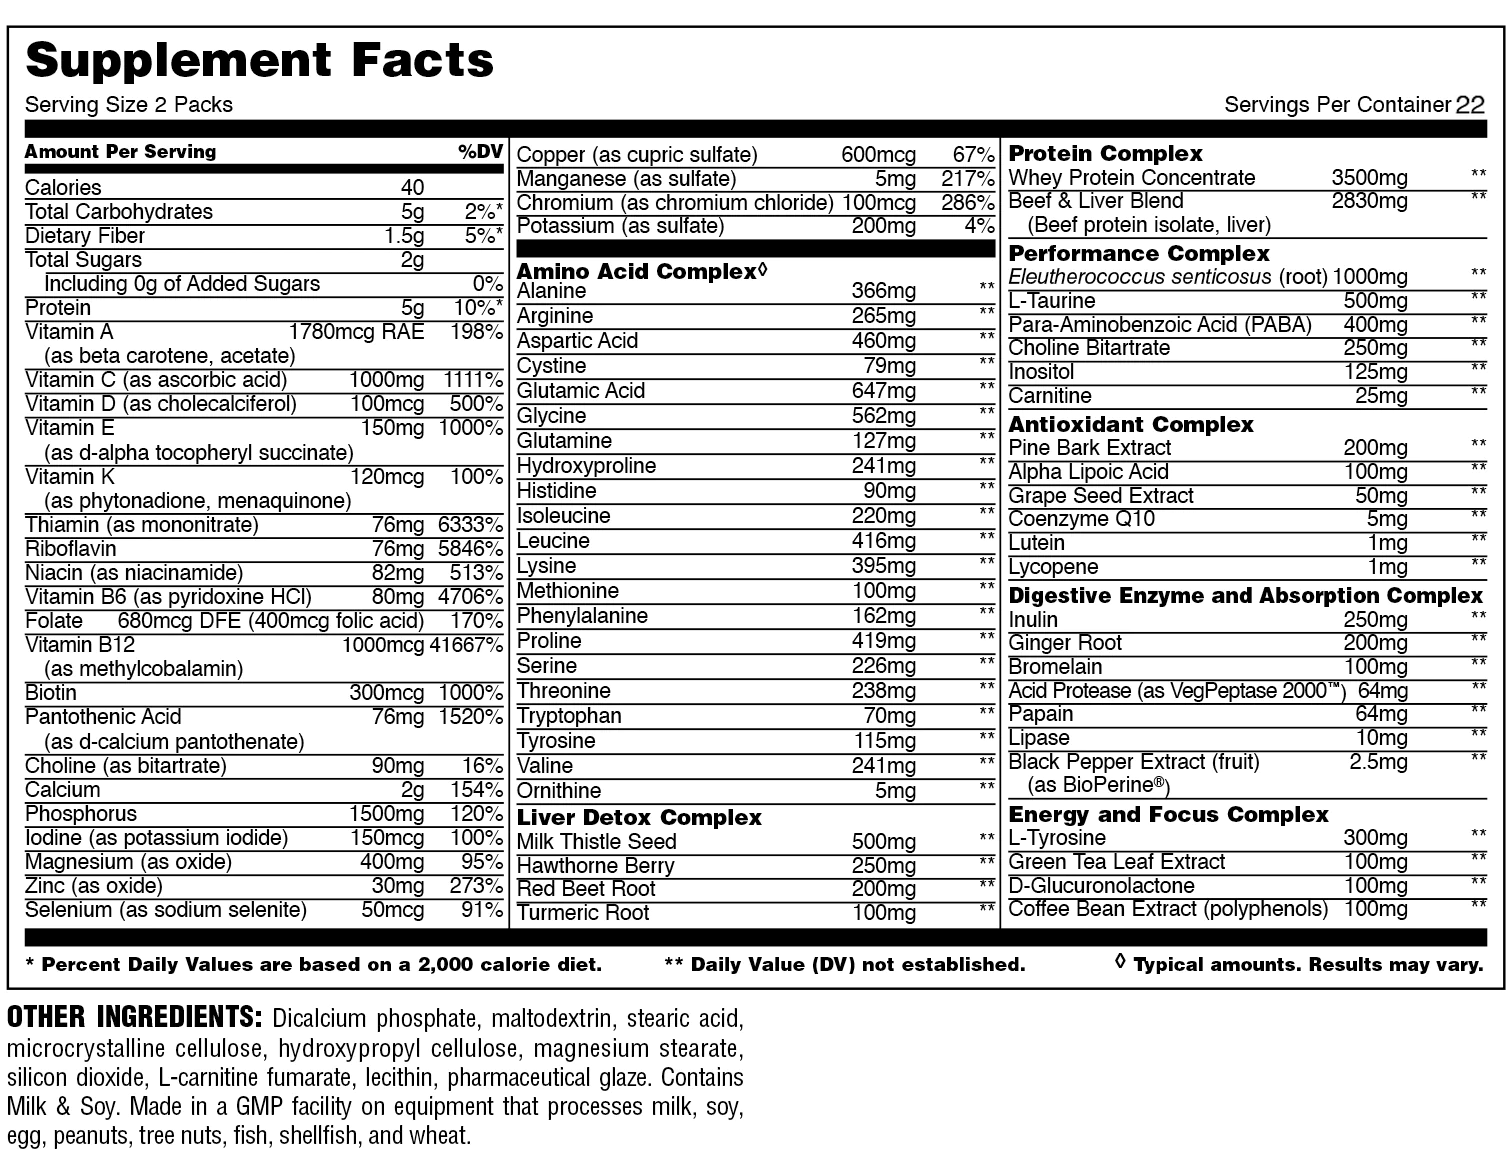 Supplement facts label detailing serving size, calories, carbohydrate, protein, dietary fiber, sugar and vitamin content, as well as other ingredients.